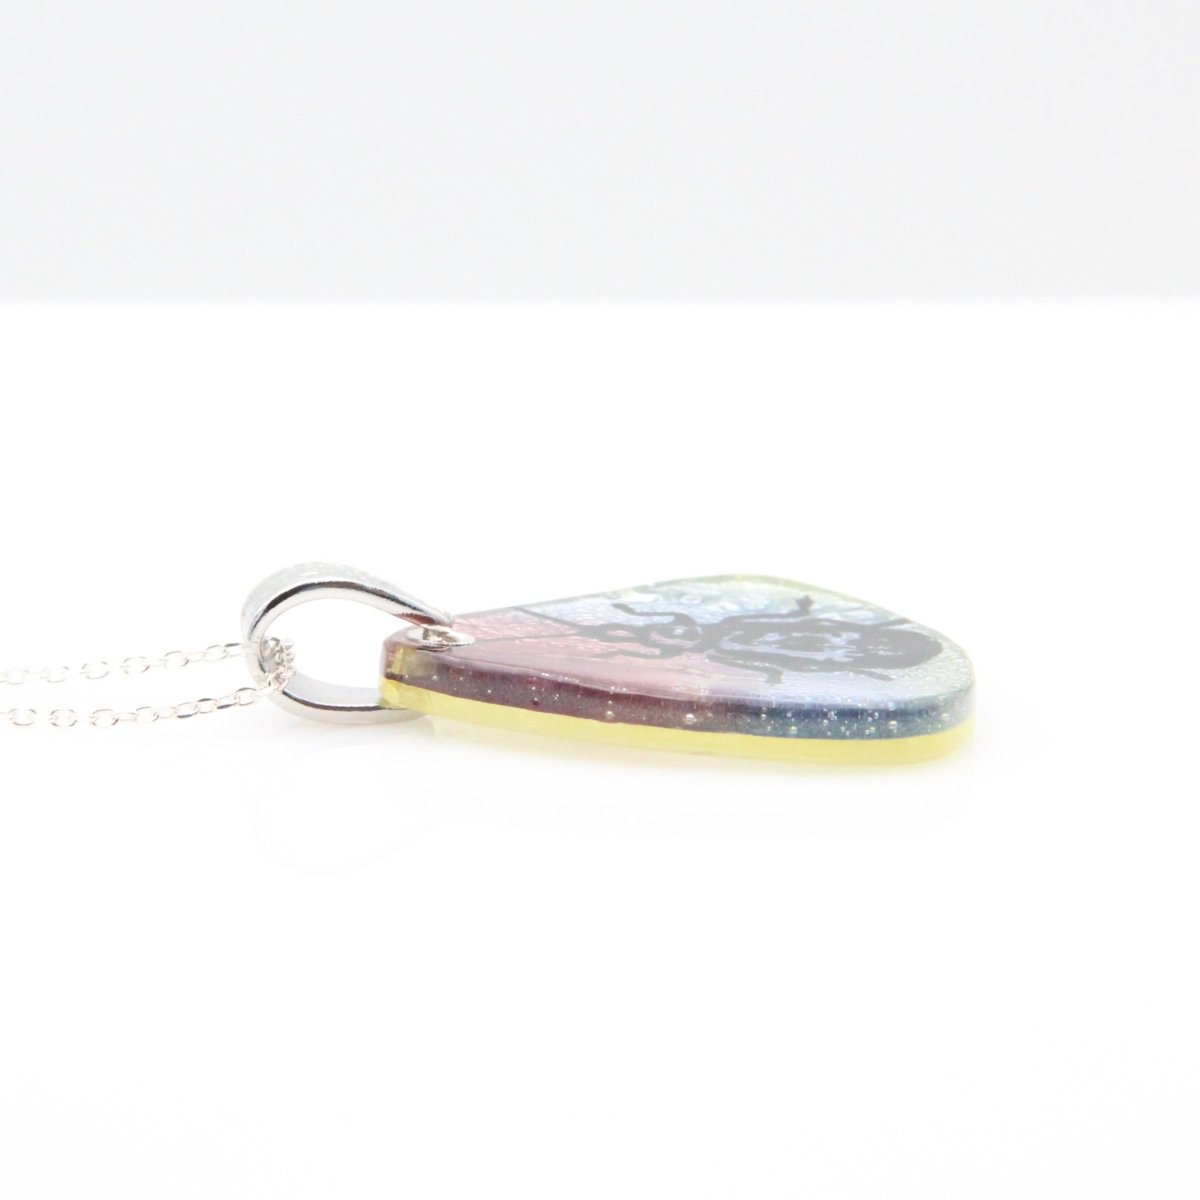 Blue and Pink Beetle Glass Pendant on a Silver Chain